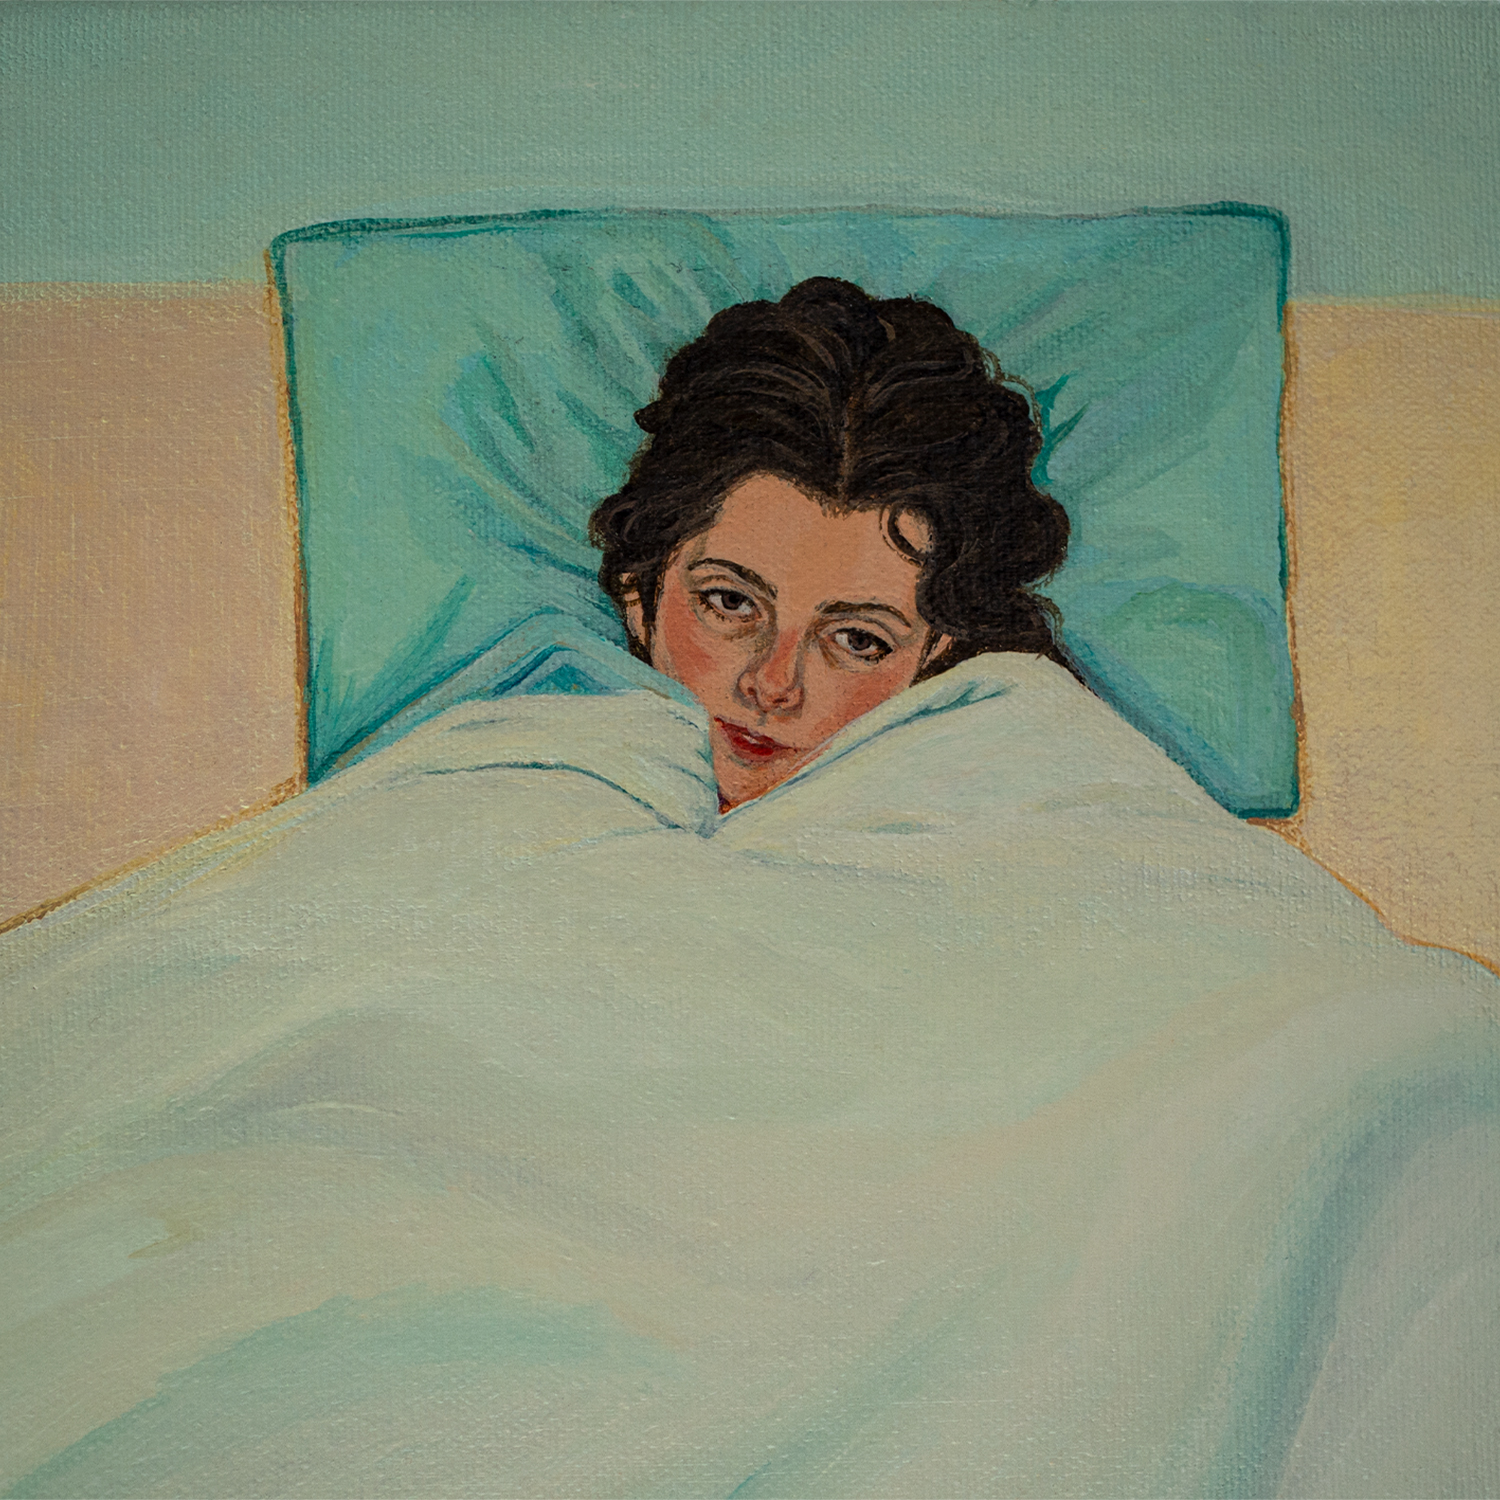 A girl lying in bed alone